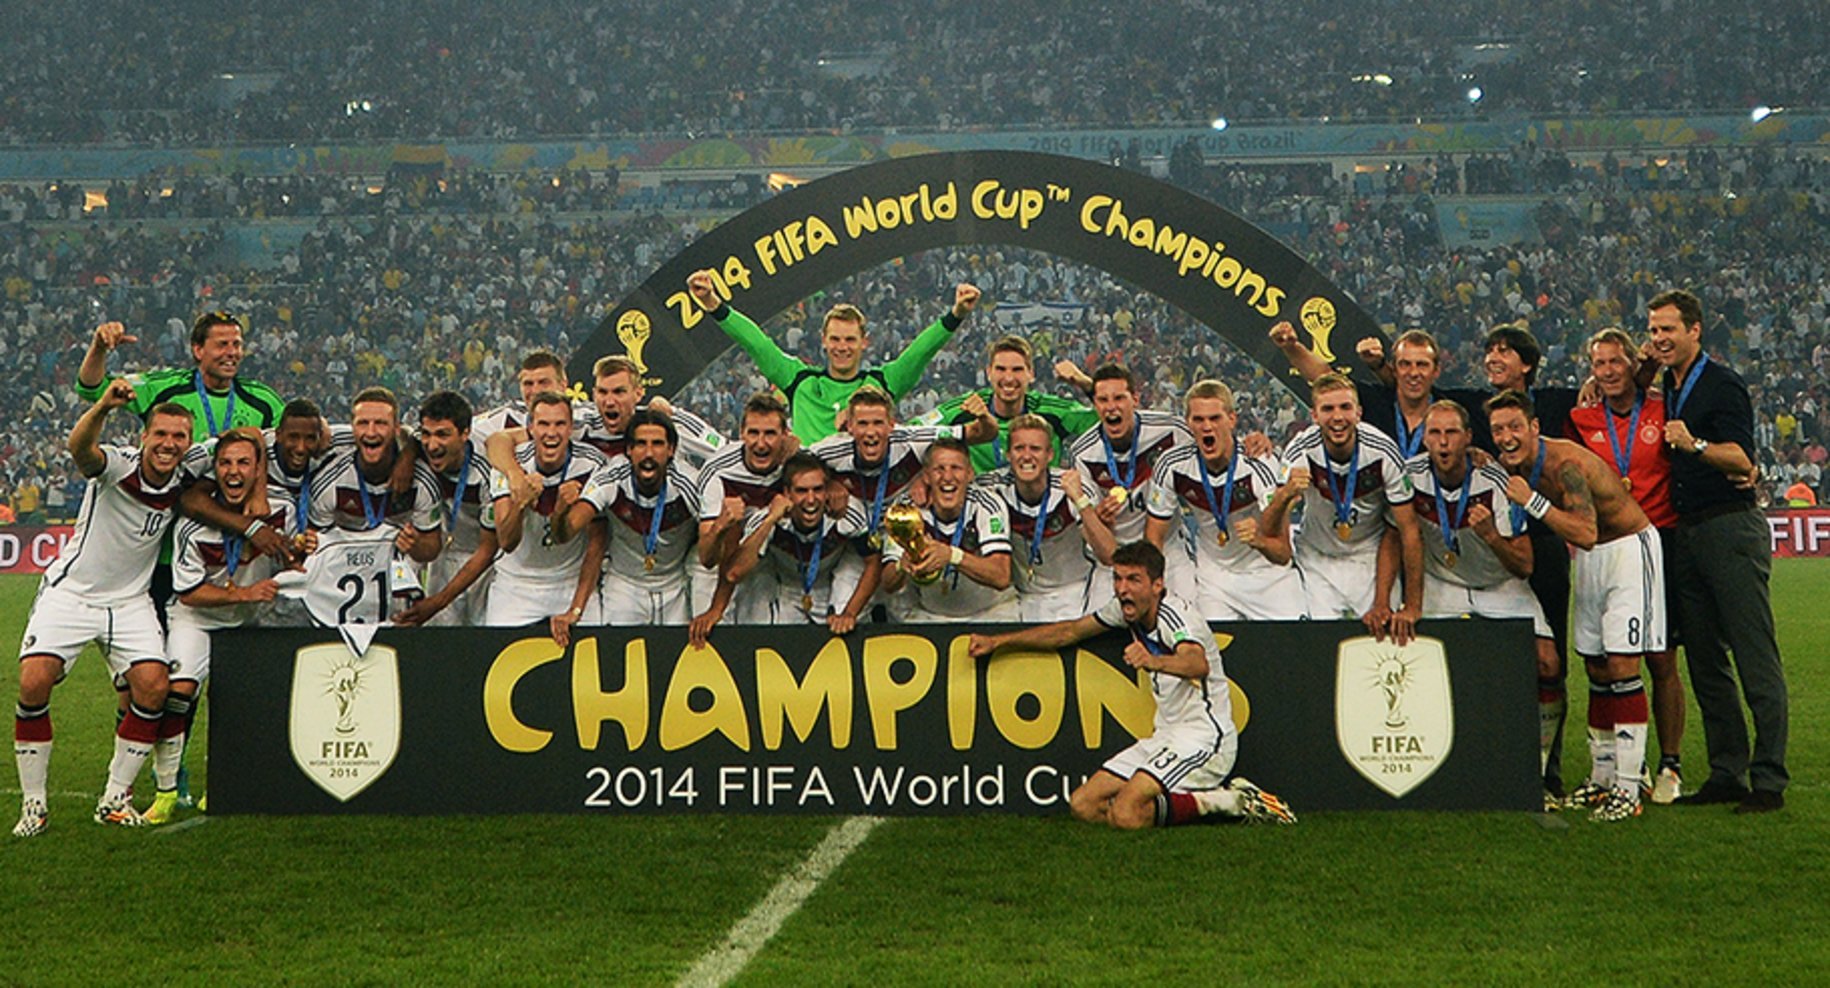 Germany Fifa World Cup 2014 Champion Soccer